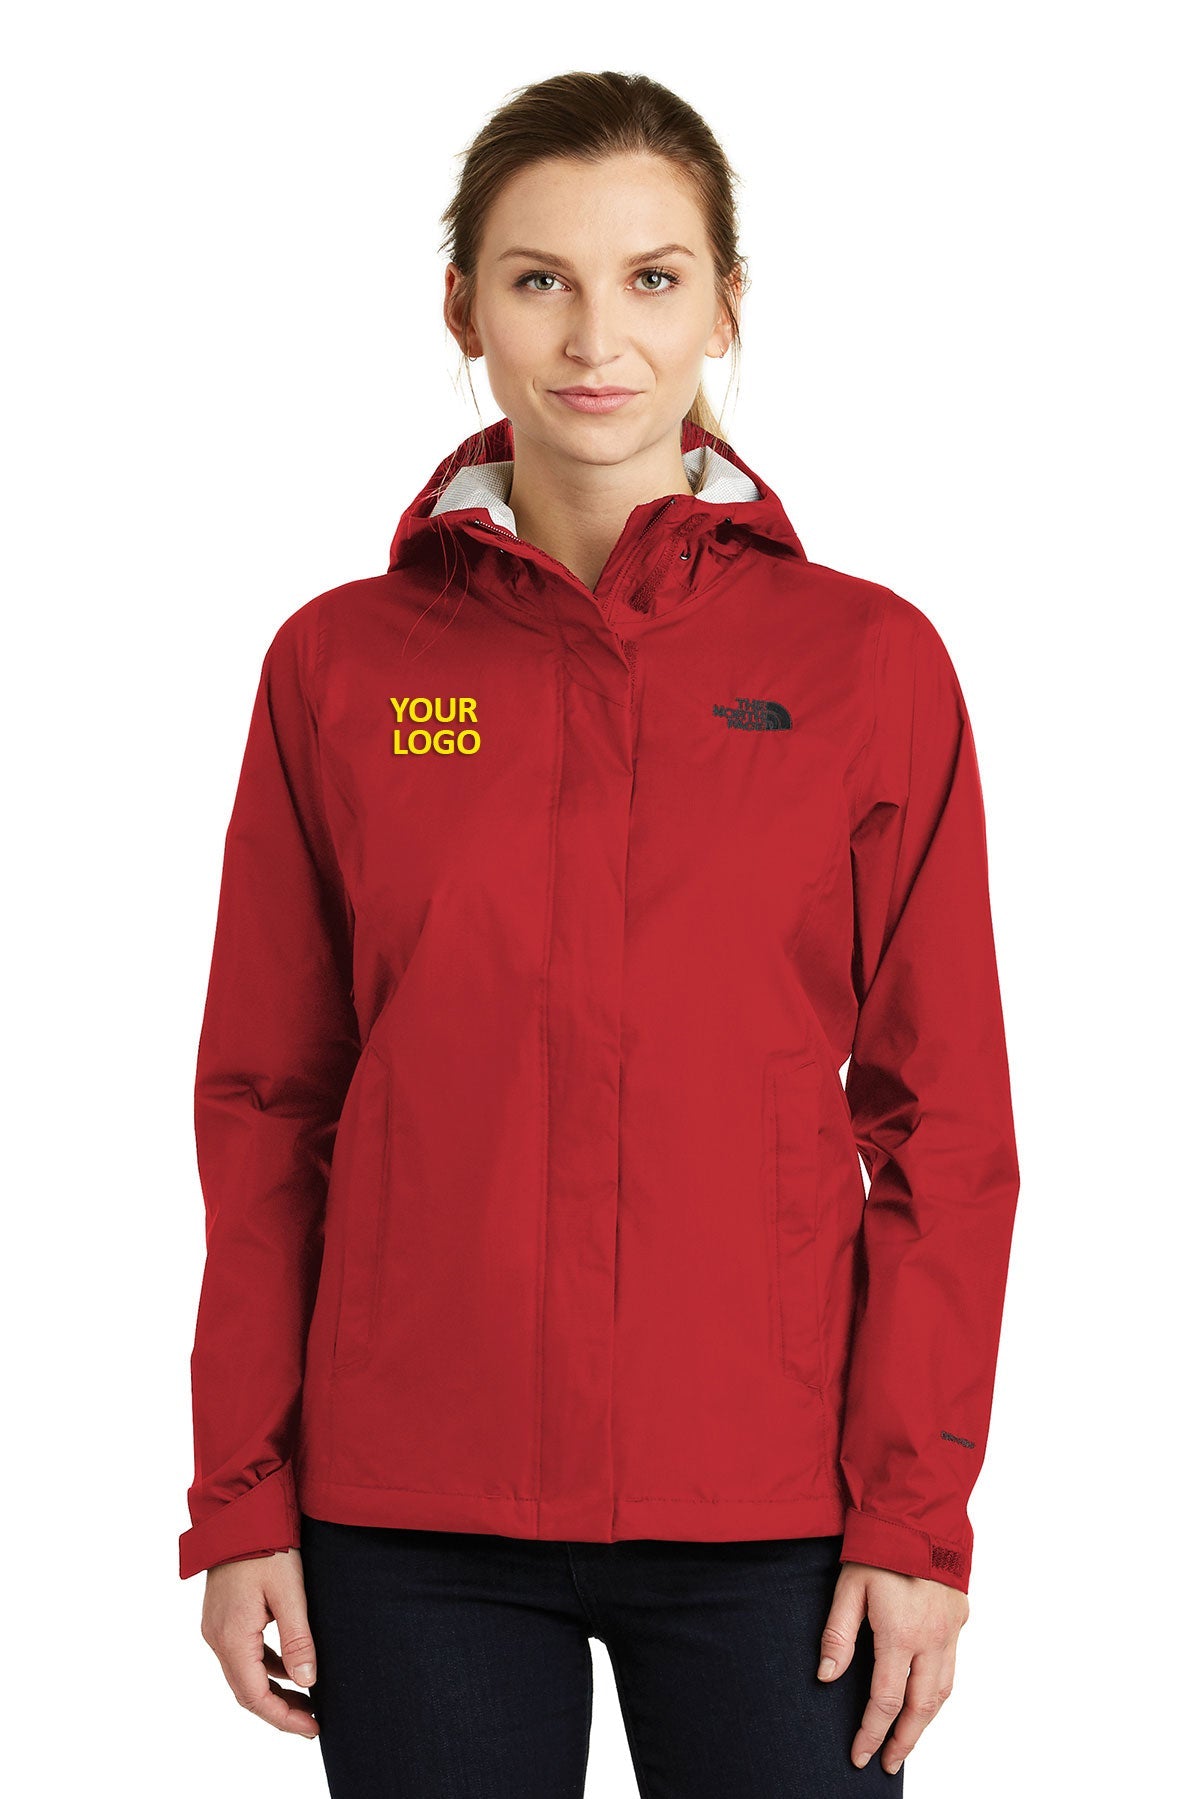 The North Face Rage Red NF0A3LH5 company logo jackets